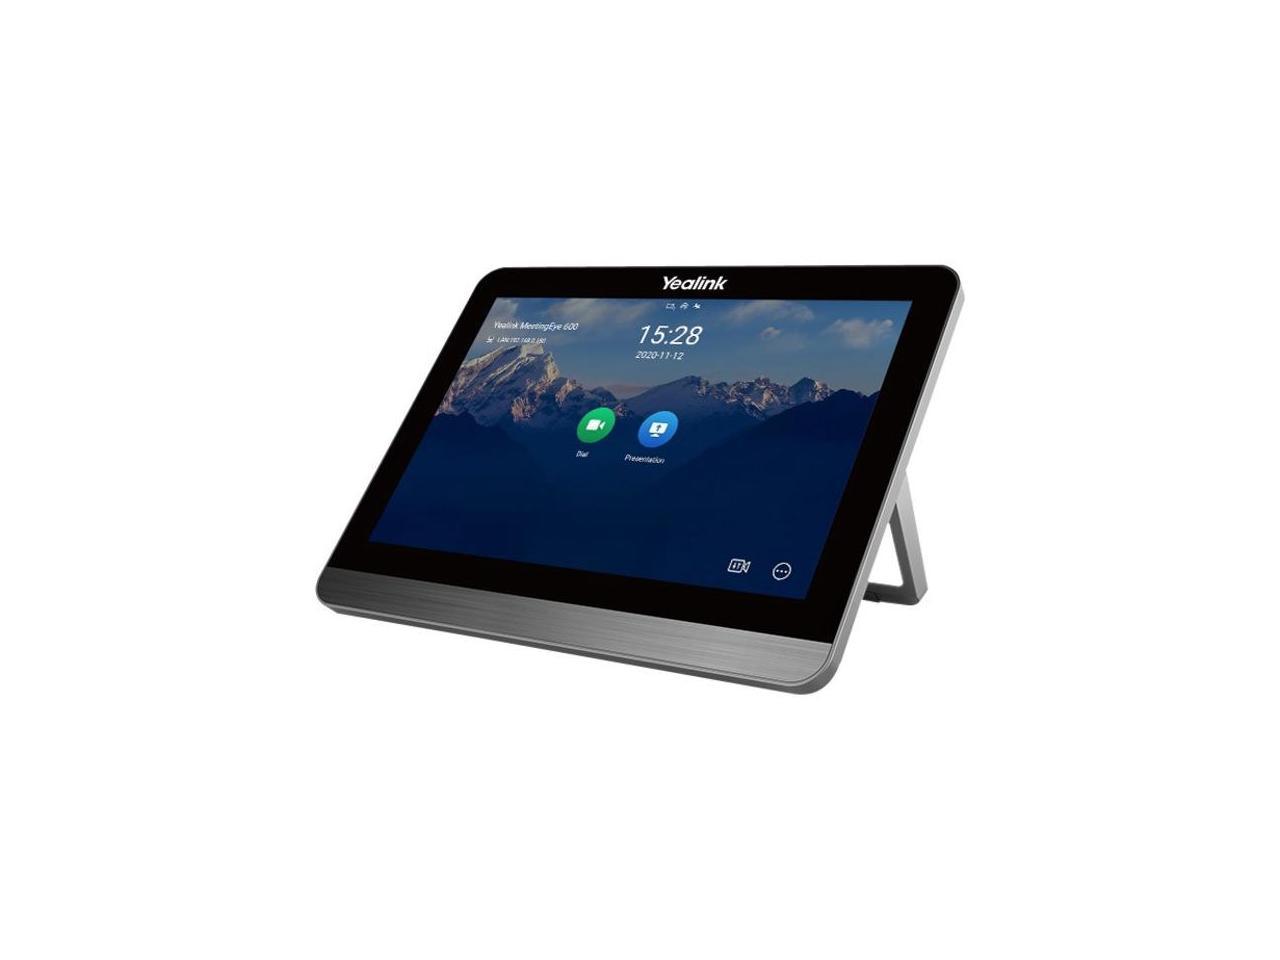 meetingbar a30 with ctp18 touch panel